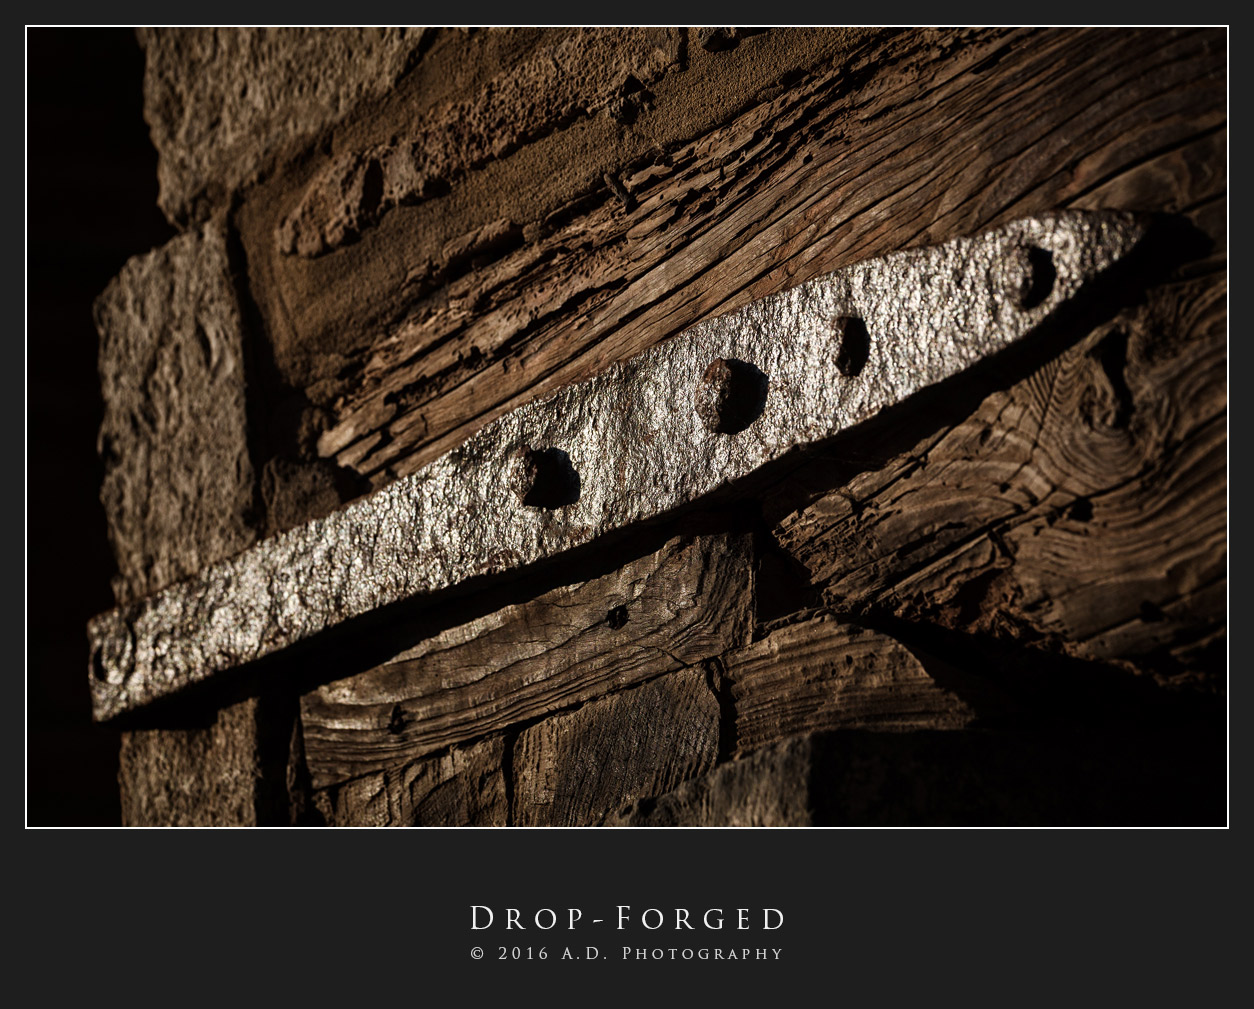 Drop-Forged...